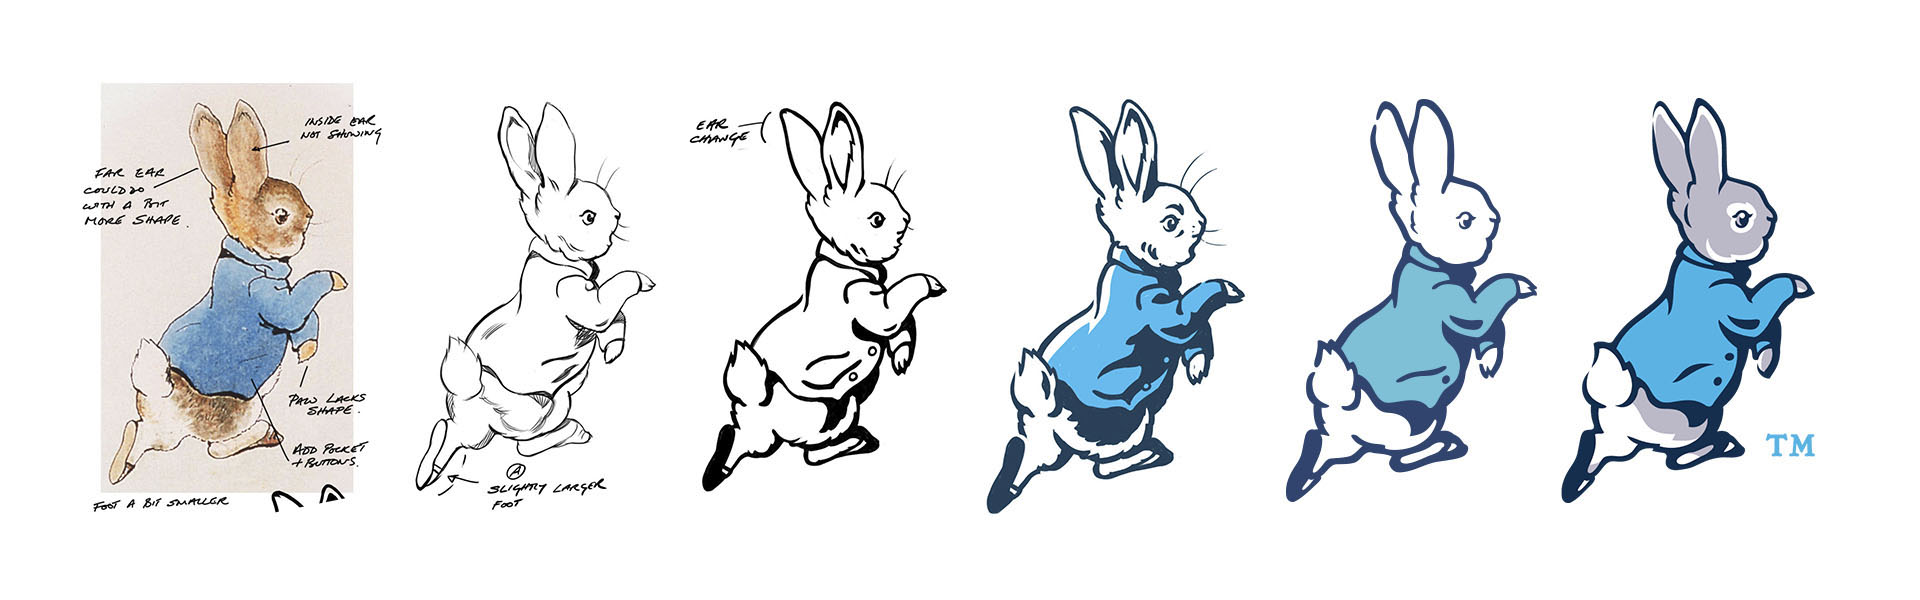 An image showing the evolution of Peter Rabbit